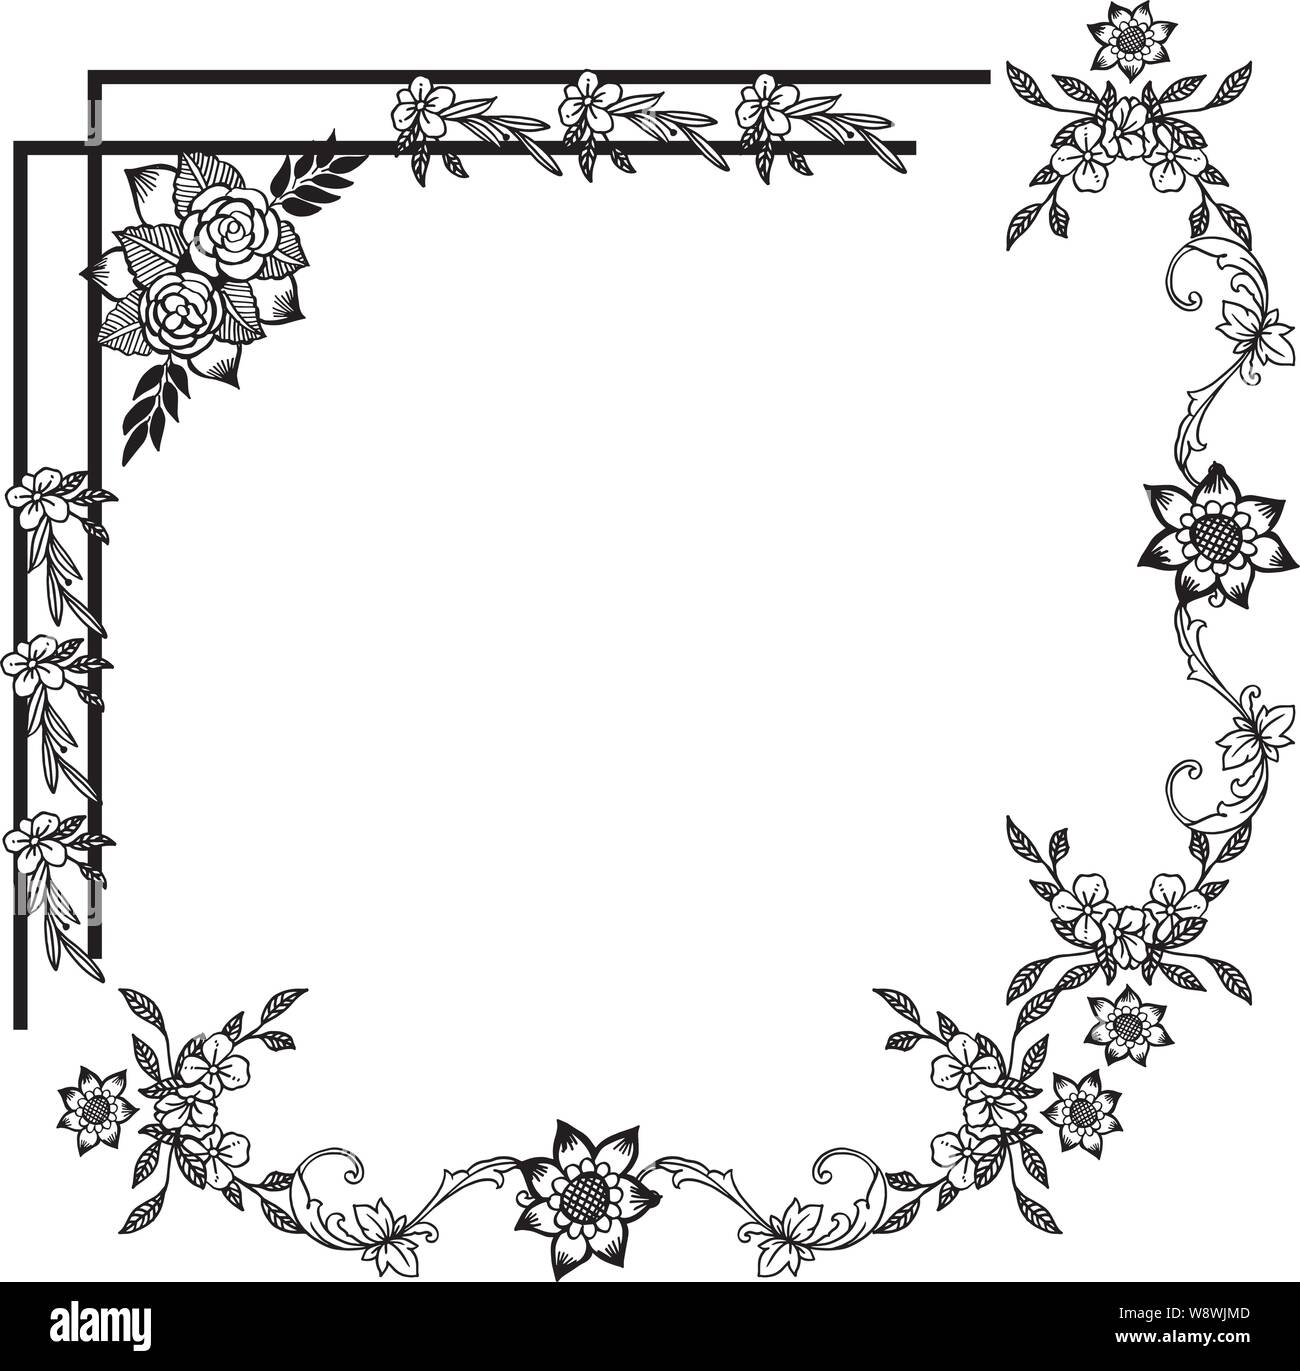 Design element floral frame isolated on white background. Vector ...